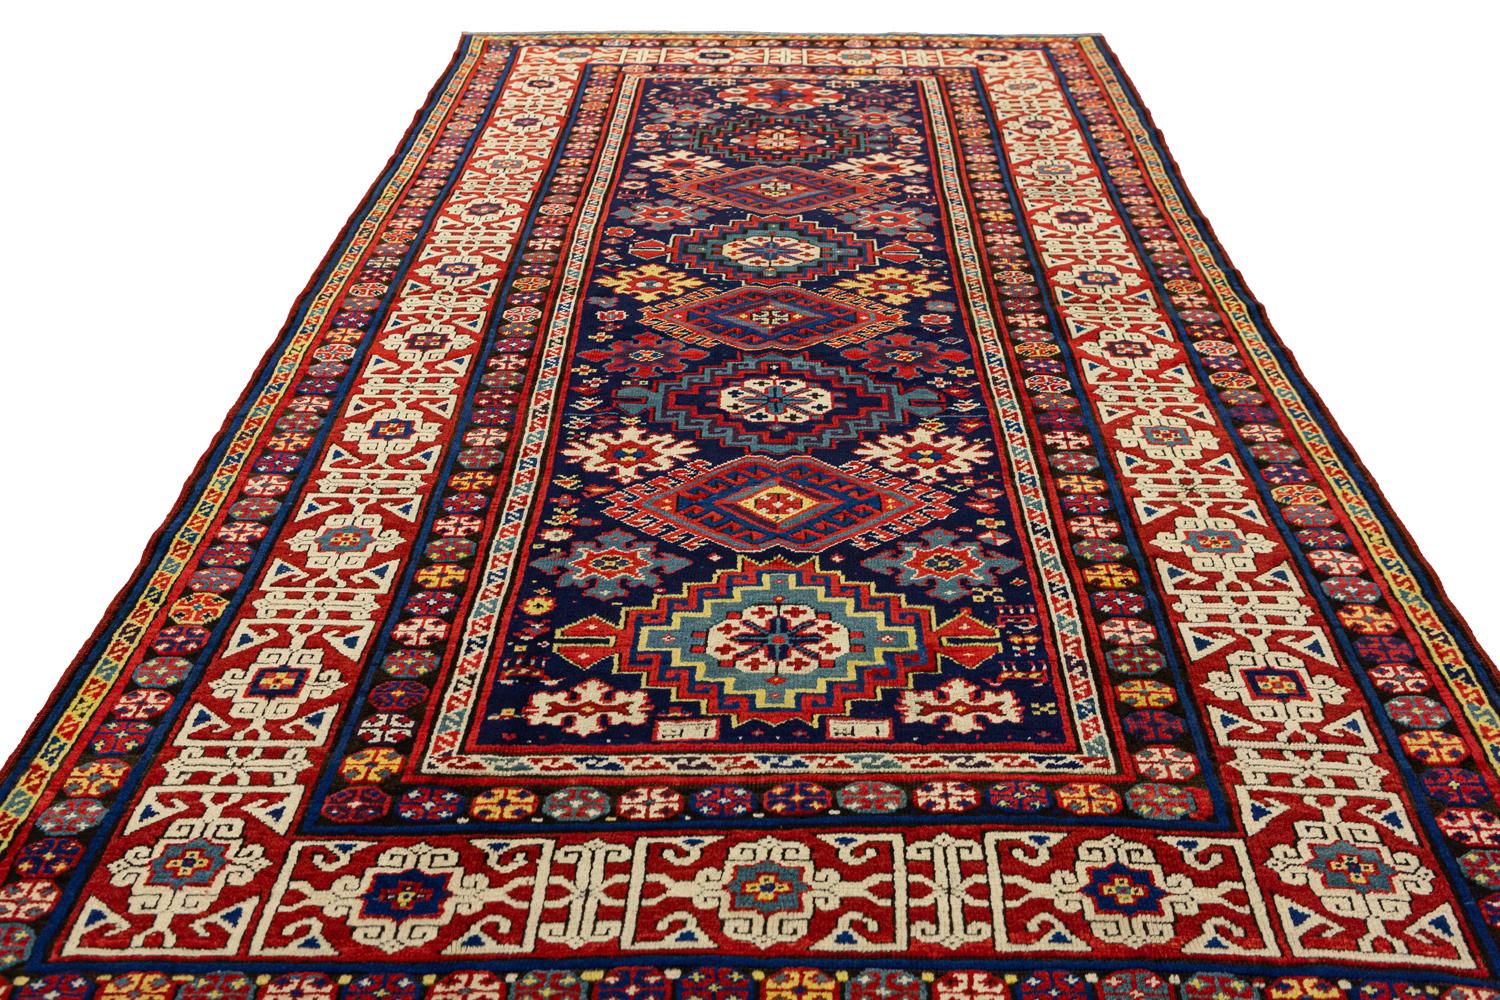 Hand-Knotted َAn Antique Caucasian Kuba Rug N°:91083393, 1880-1900